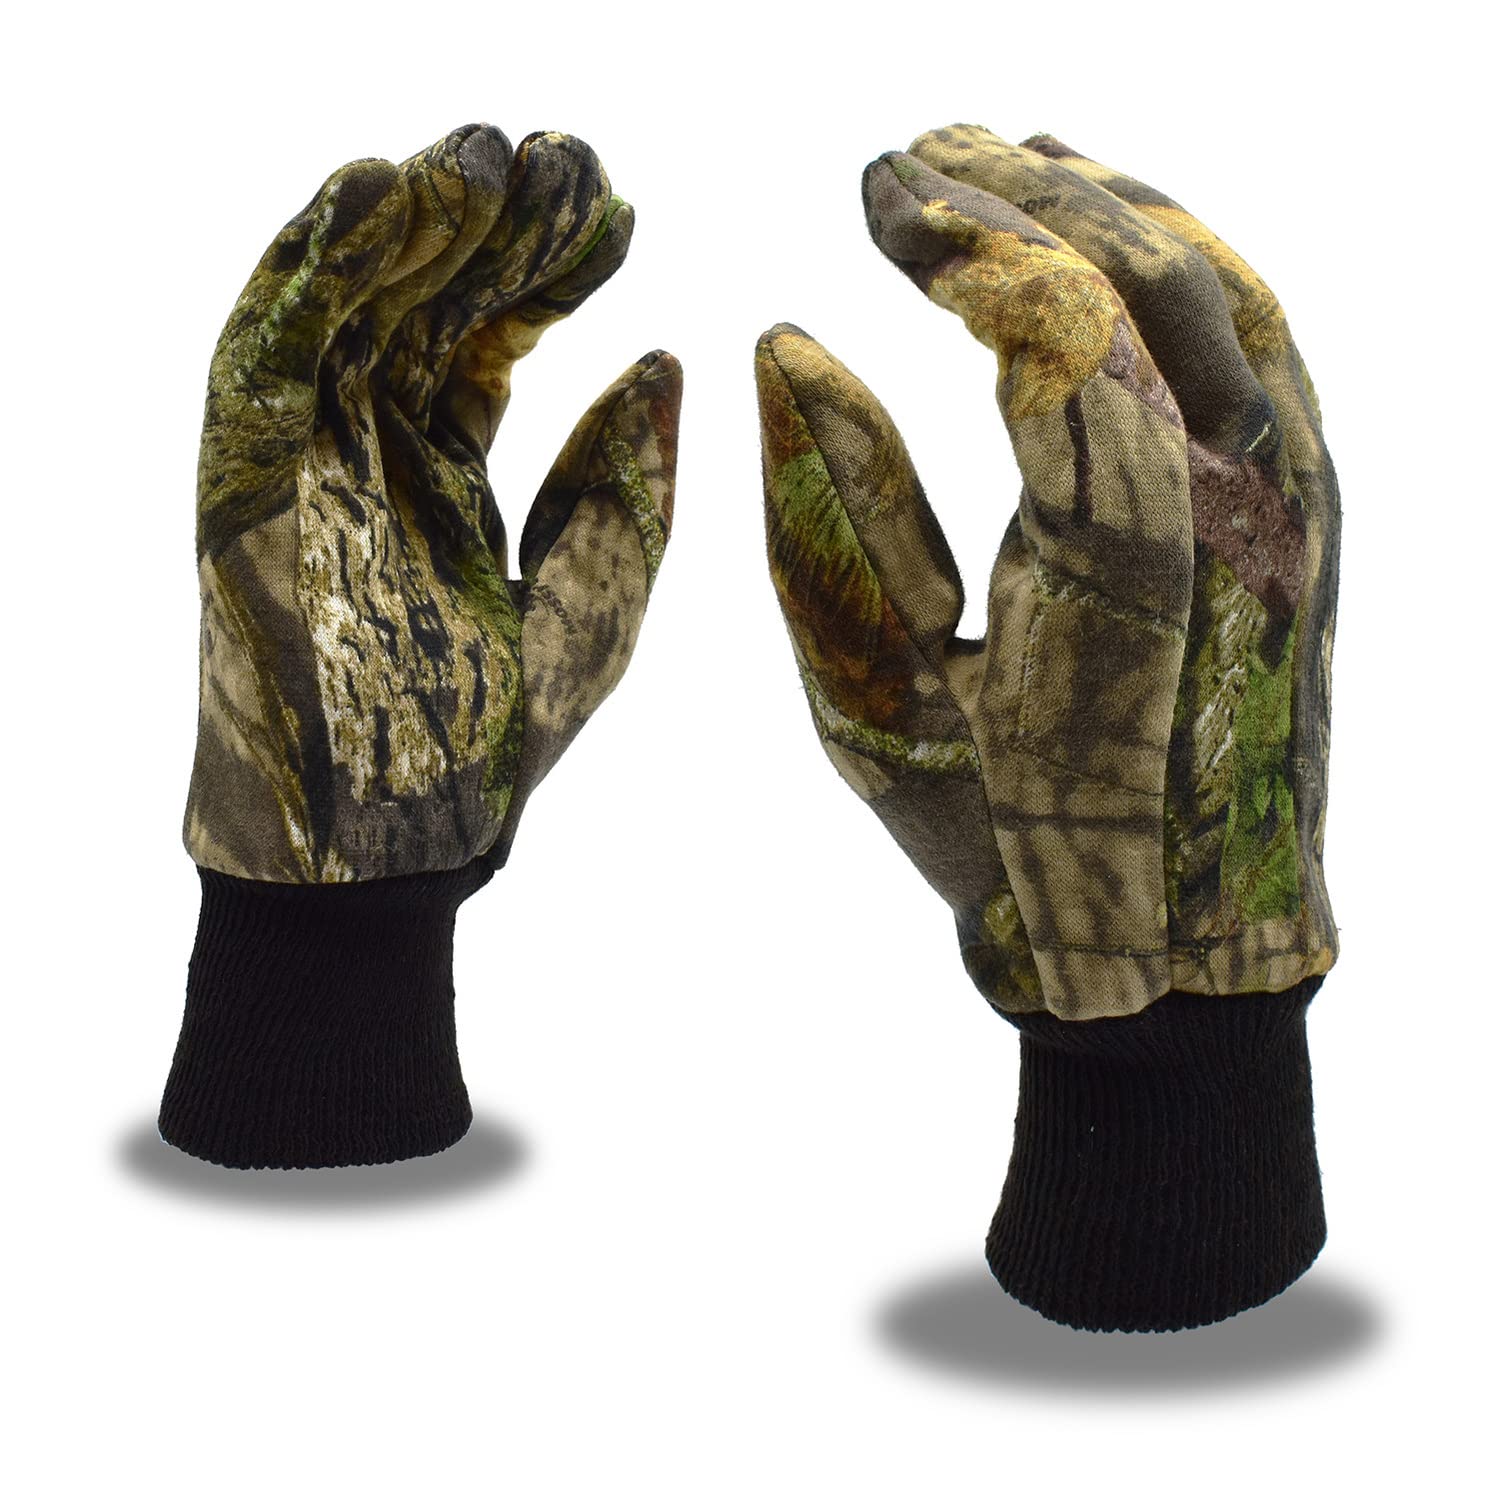 Cordova 14031MSY Heavy-Weight Jersey Cotton Knit Wrist Hunting Gloves, Mossy Oak Break-Up Country, Large